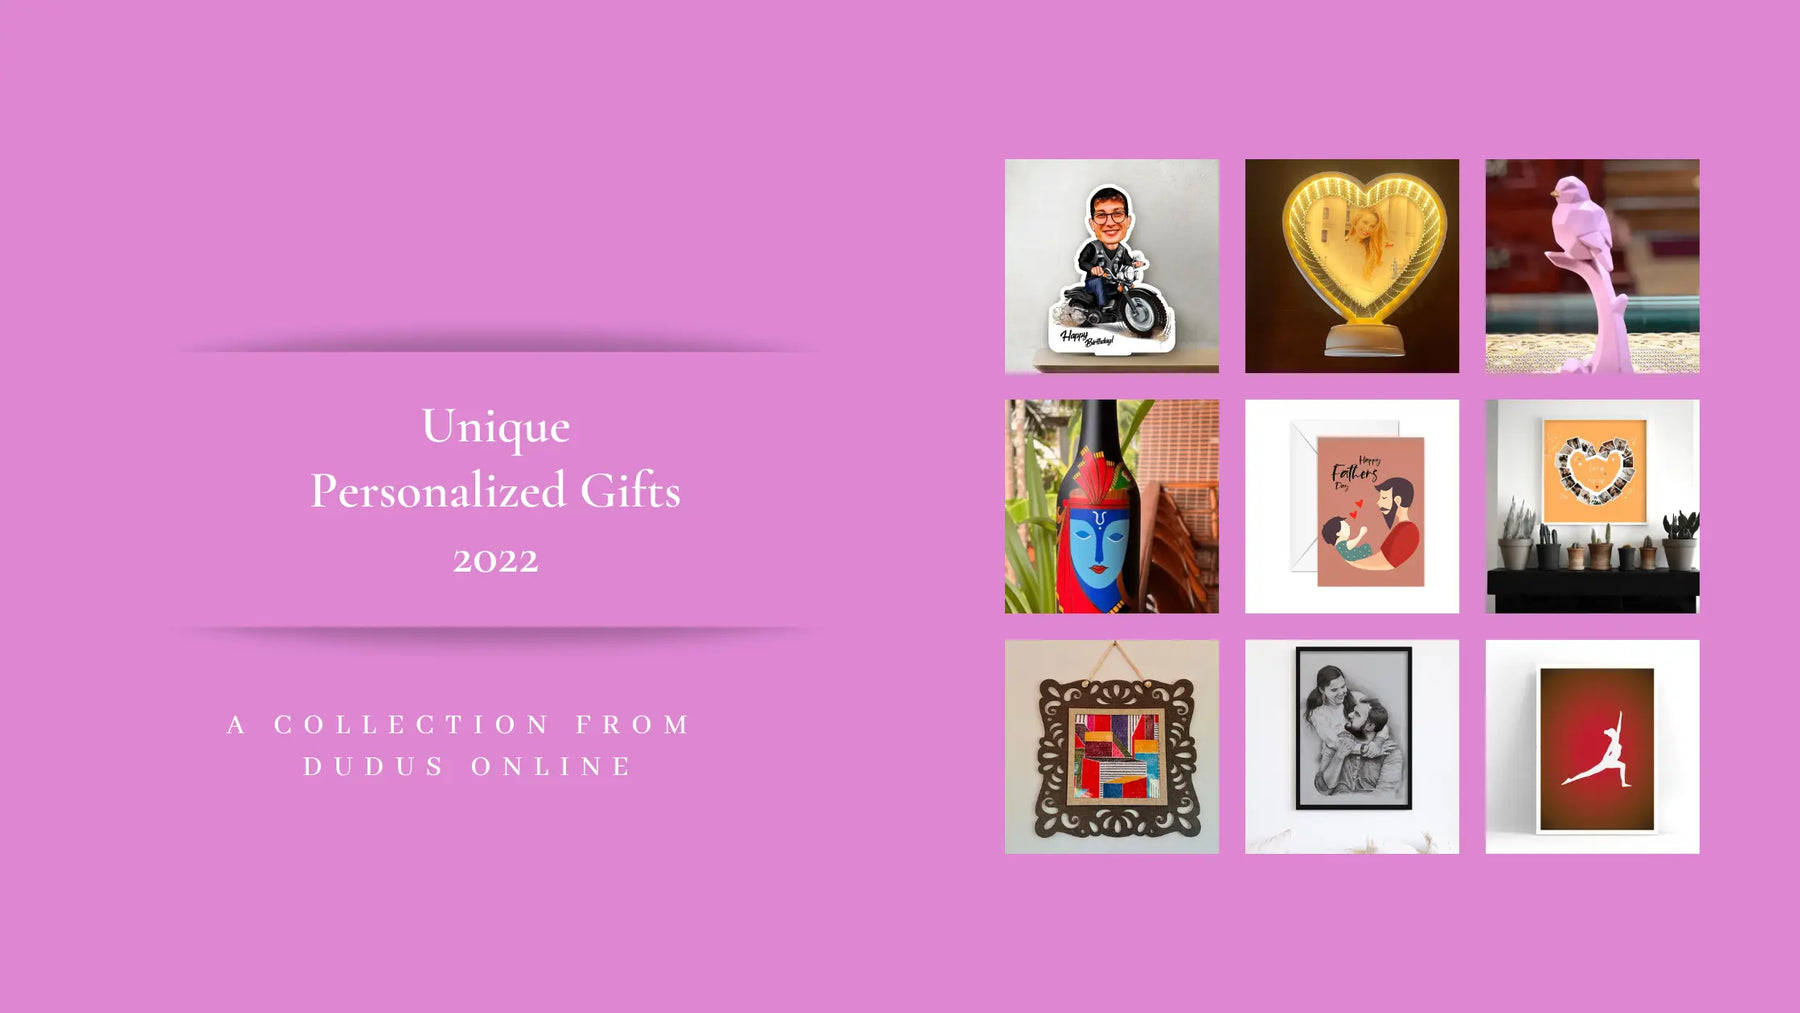 Unique personalized gifts for your dear ones